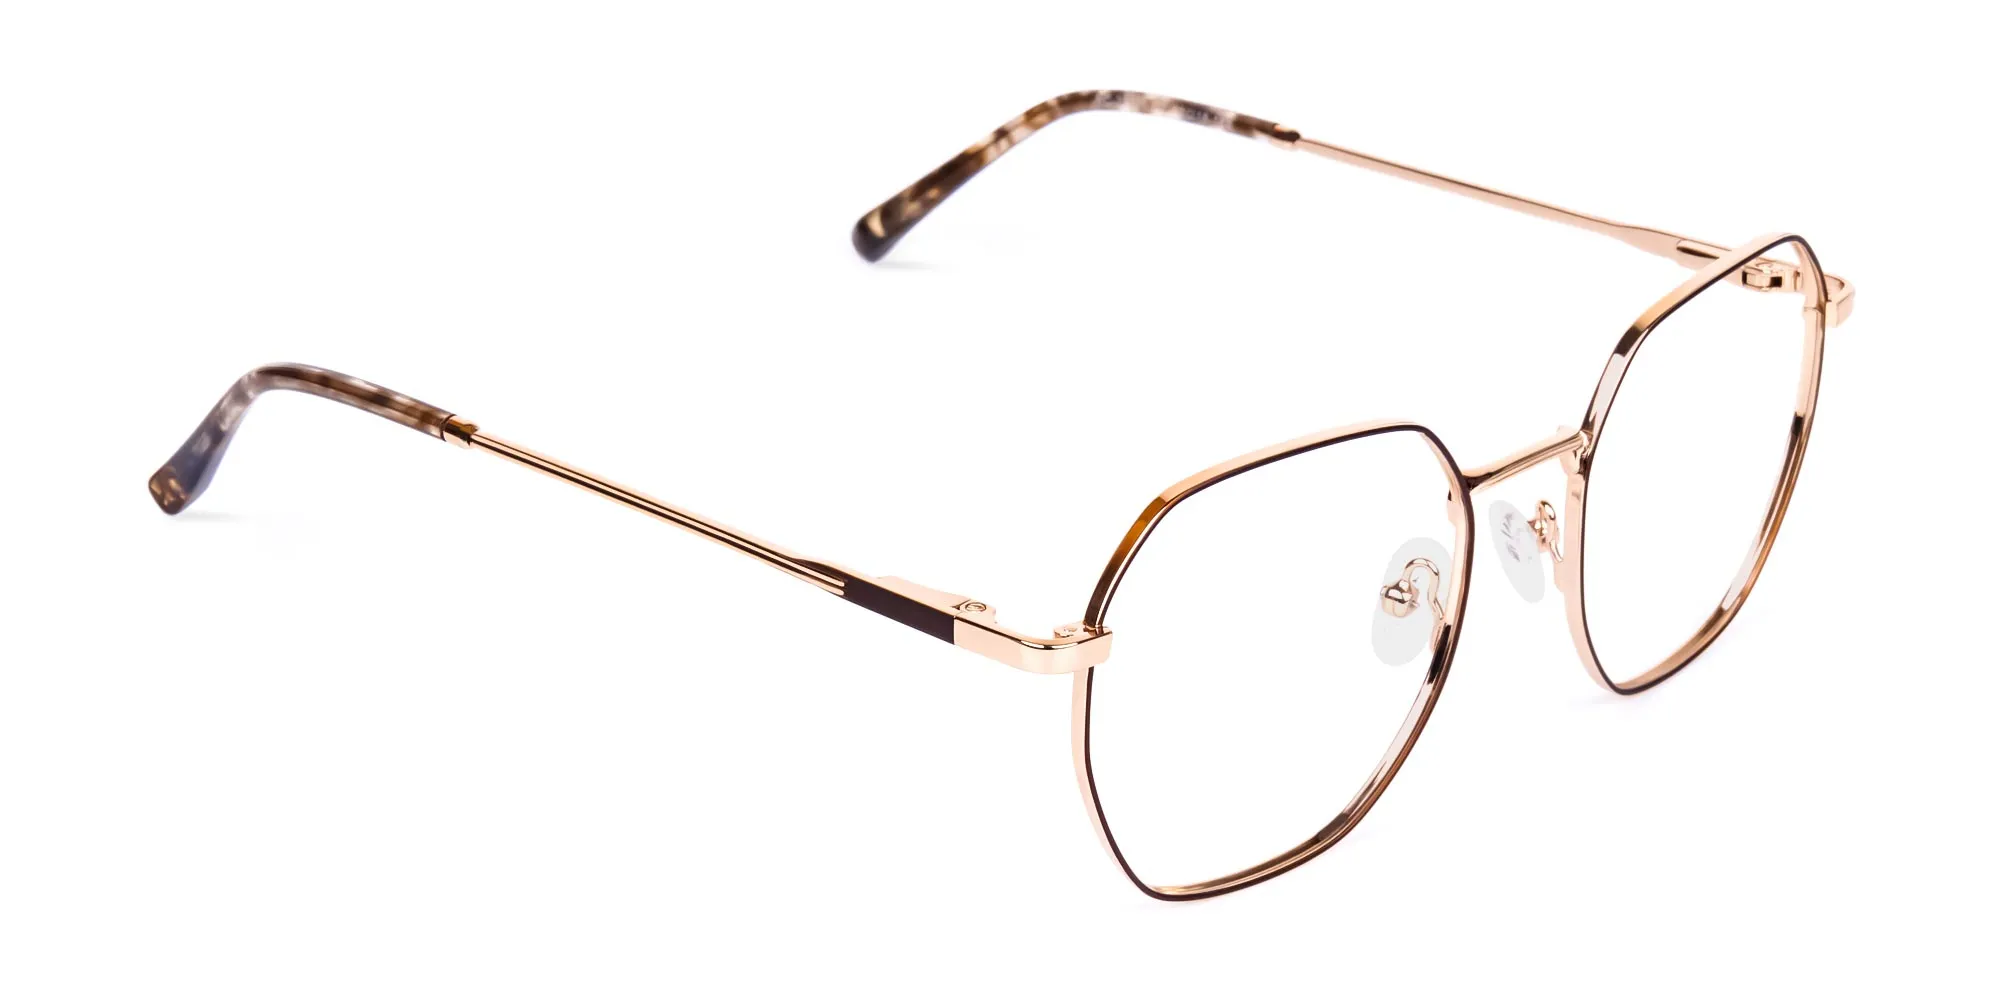 Brown-and-Gold-Geometric-Glasses-2